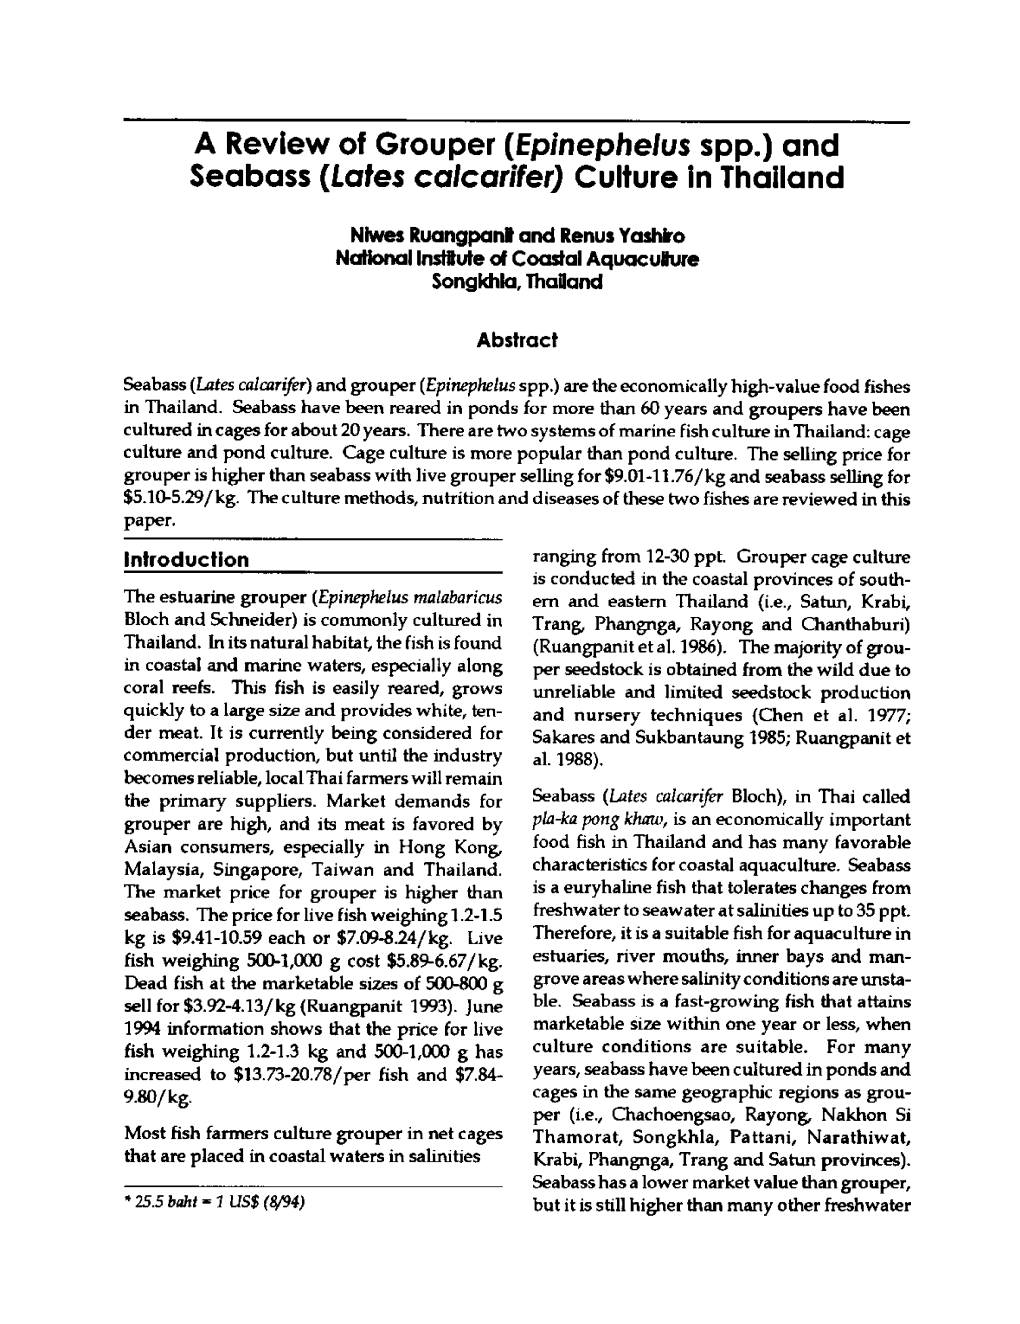 A Review of Grouper {Epinephelus Spp.} and Seabass {Lates Calcarifer! Culture in Thailand